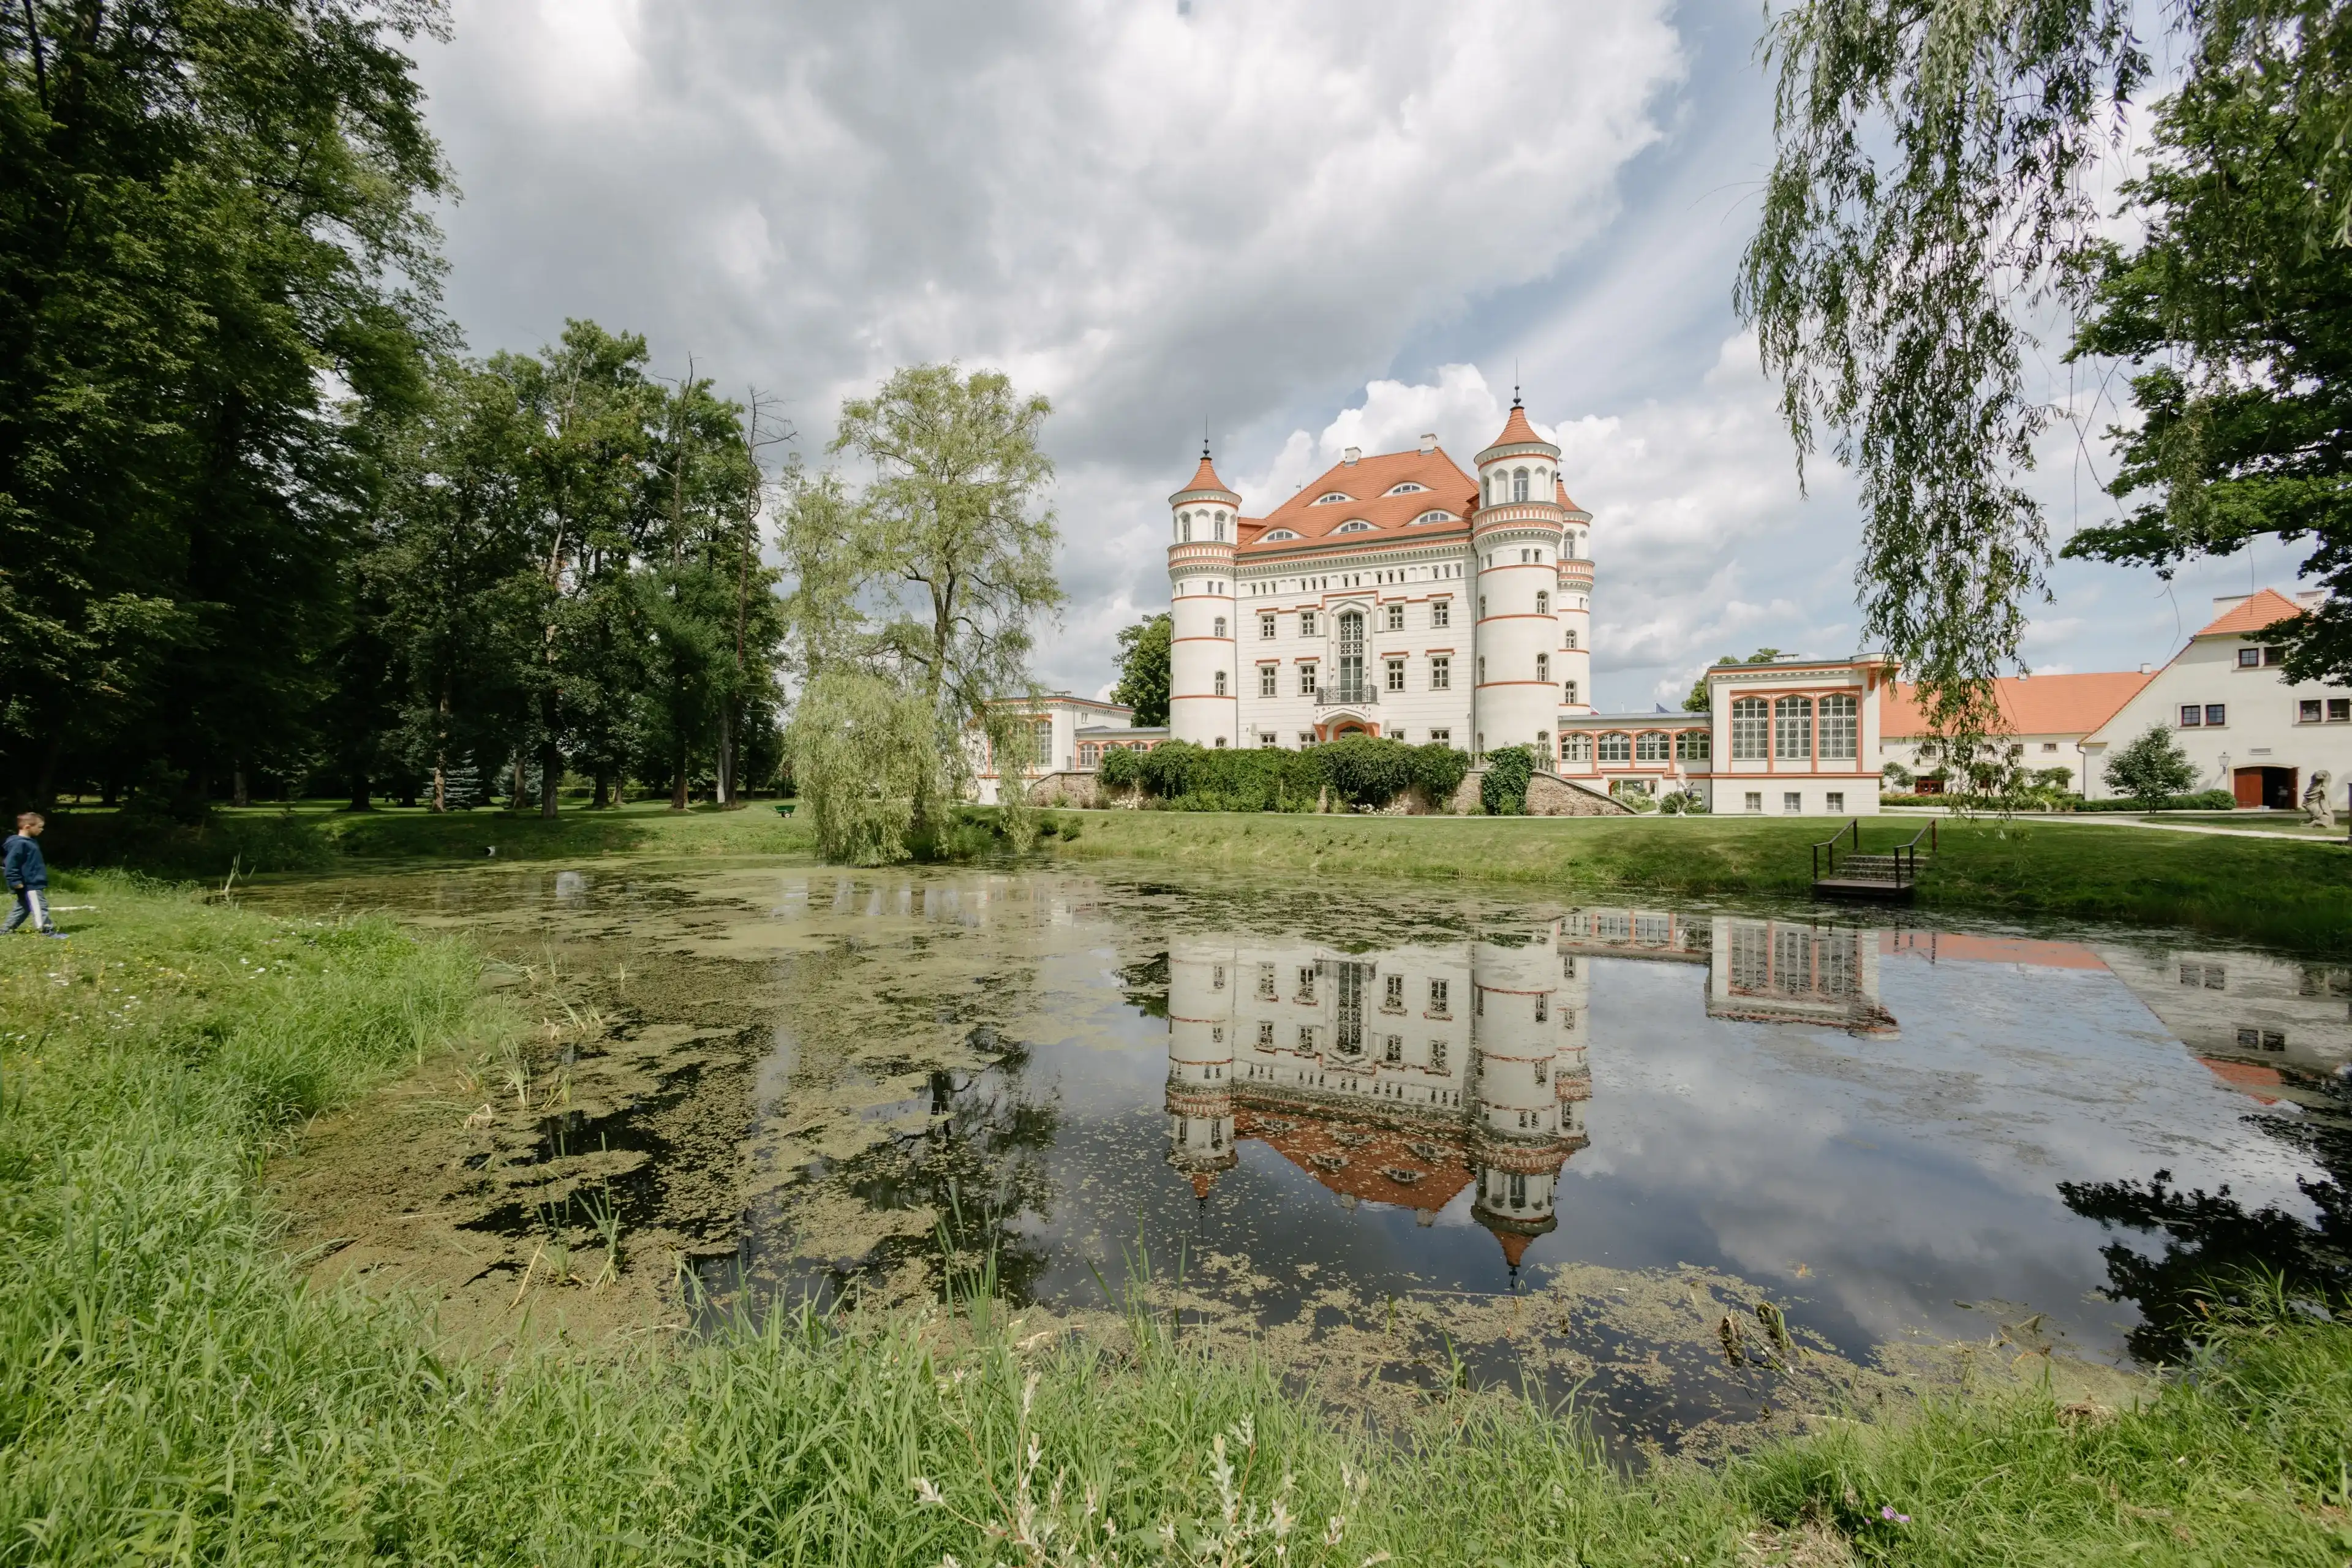 Lower Silesia hotels. Best hotels in Lower Silesia, Poland